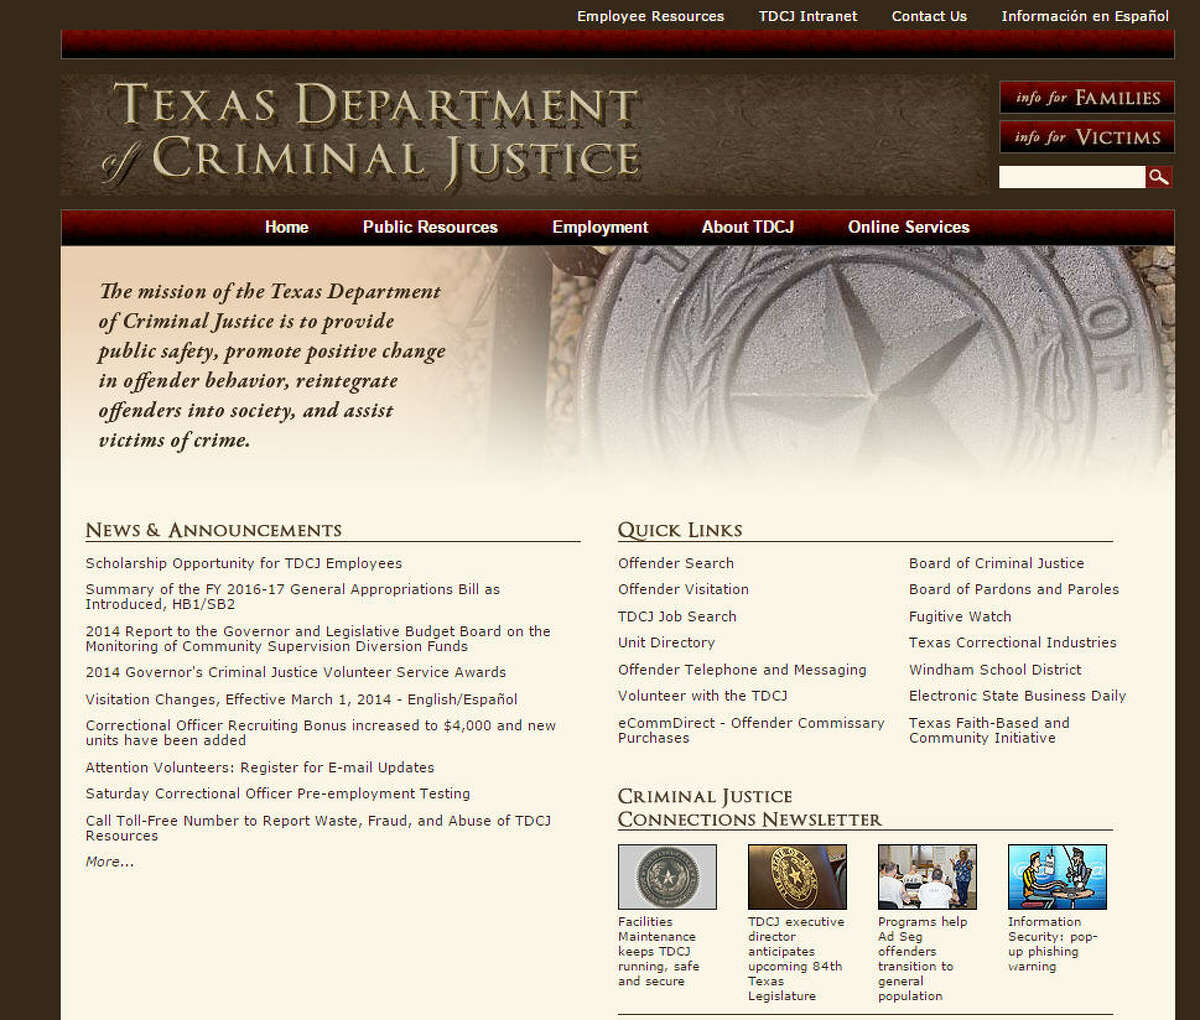 Texas Department Of Criminal Justice No. off employees: 37,825 Median Salary: $37,732 Source: Texas Tribune